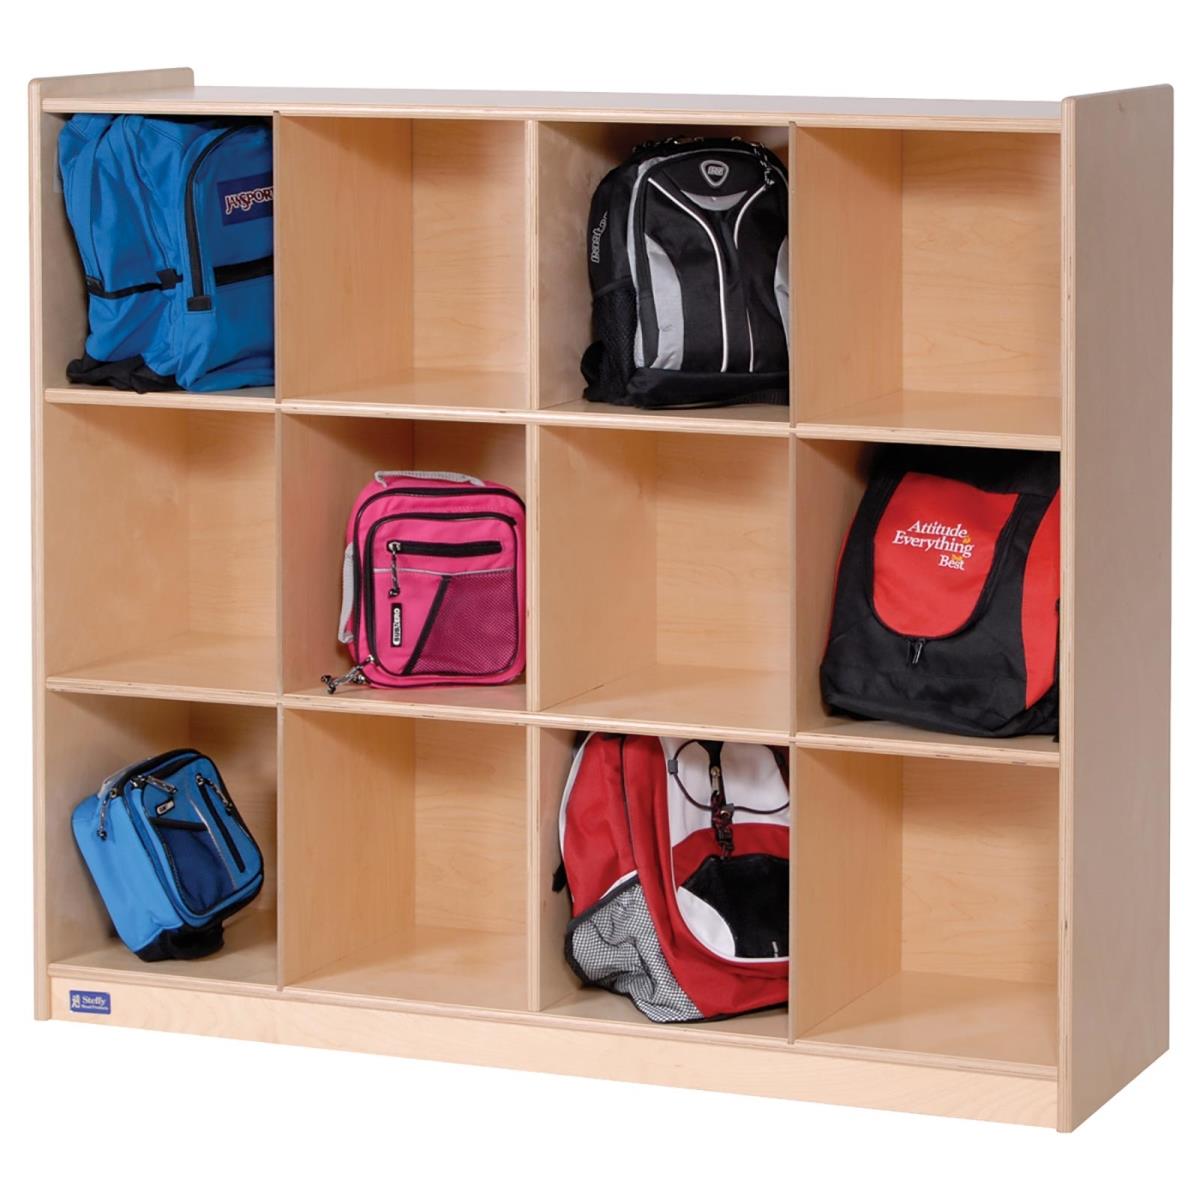 Angeles Ang1414 Brich 12-cubby Storage - Uv Finish - 14 X 47 X 43 In.